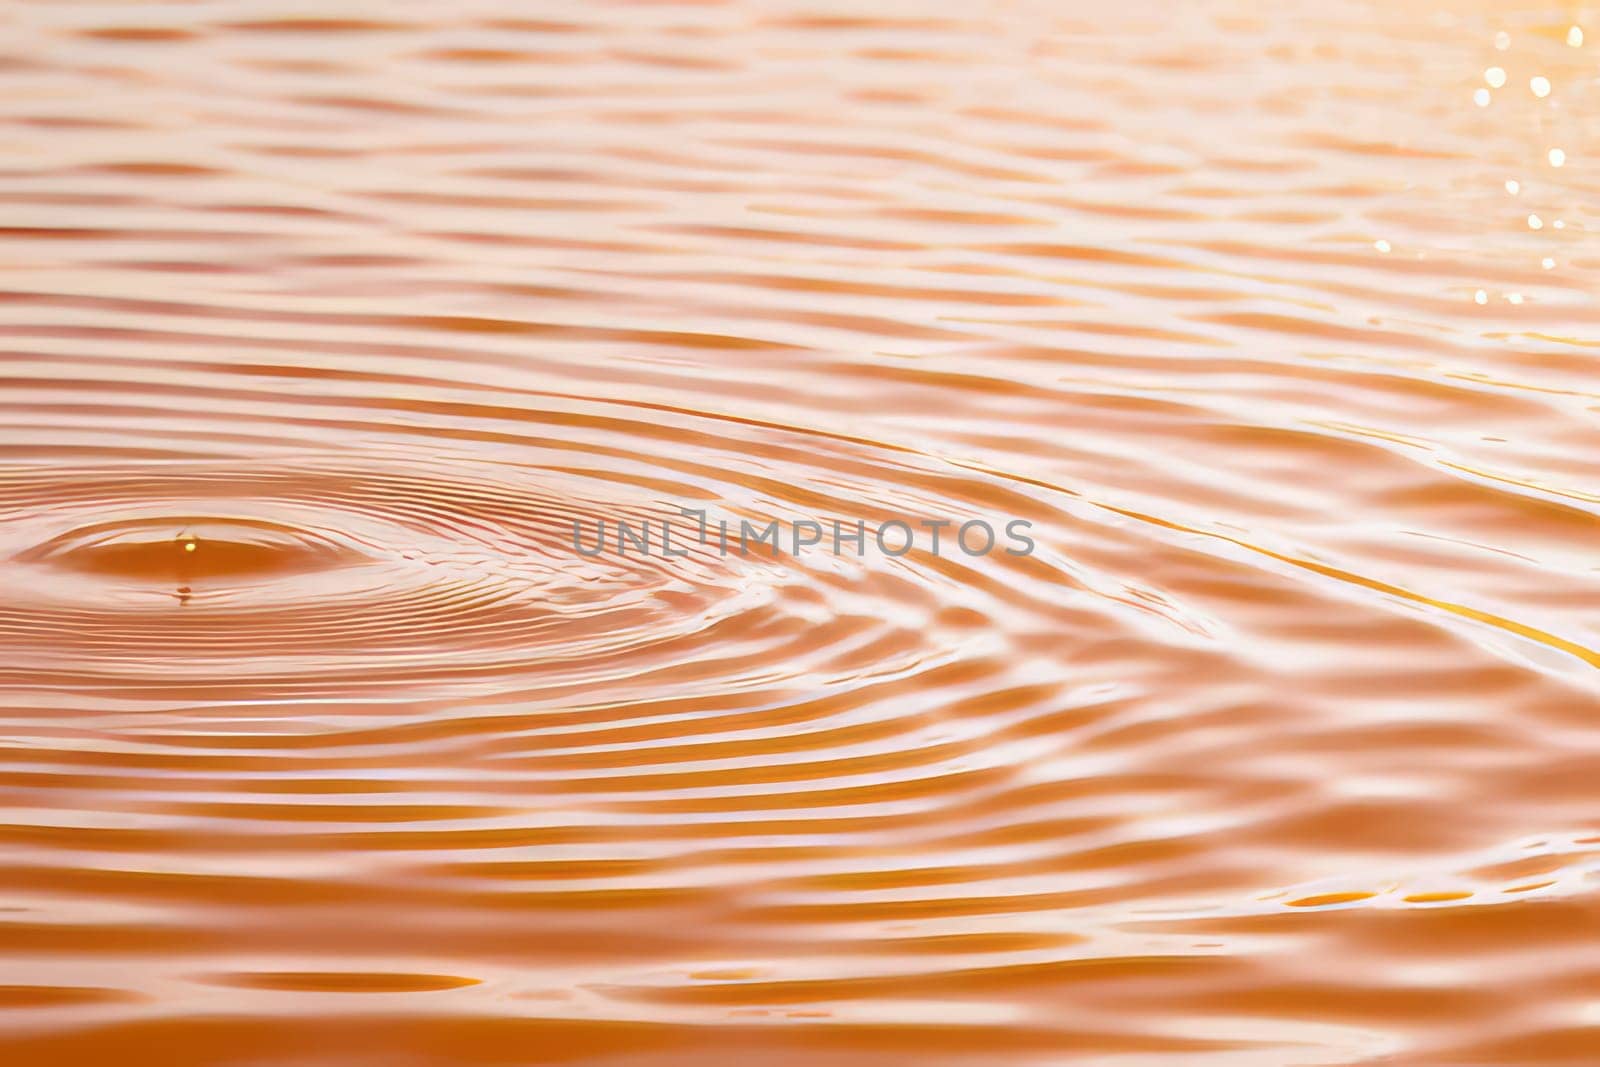 Circles and waves on peach-colored water in sunlight Abstract natural background. by Annu1tochka